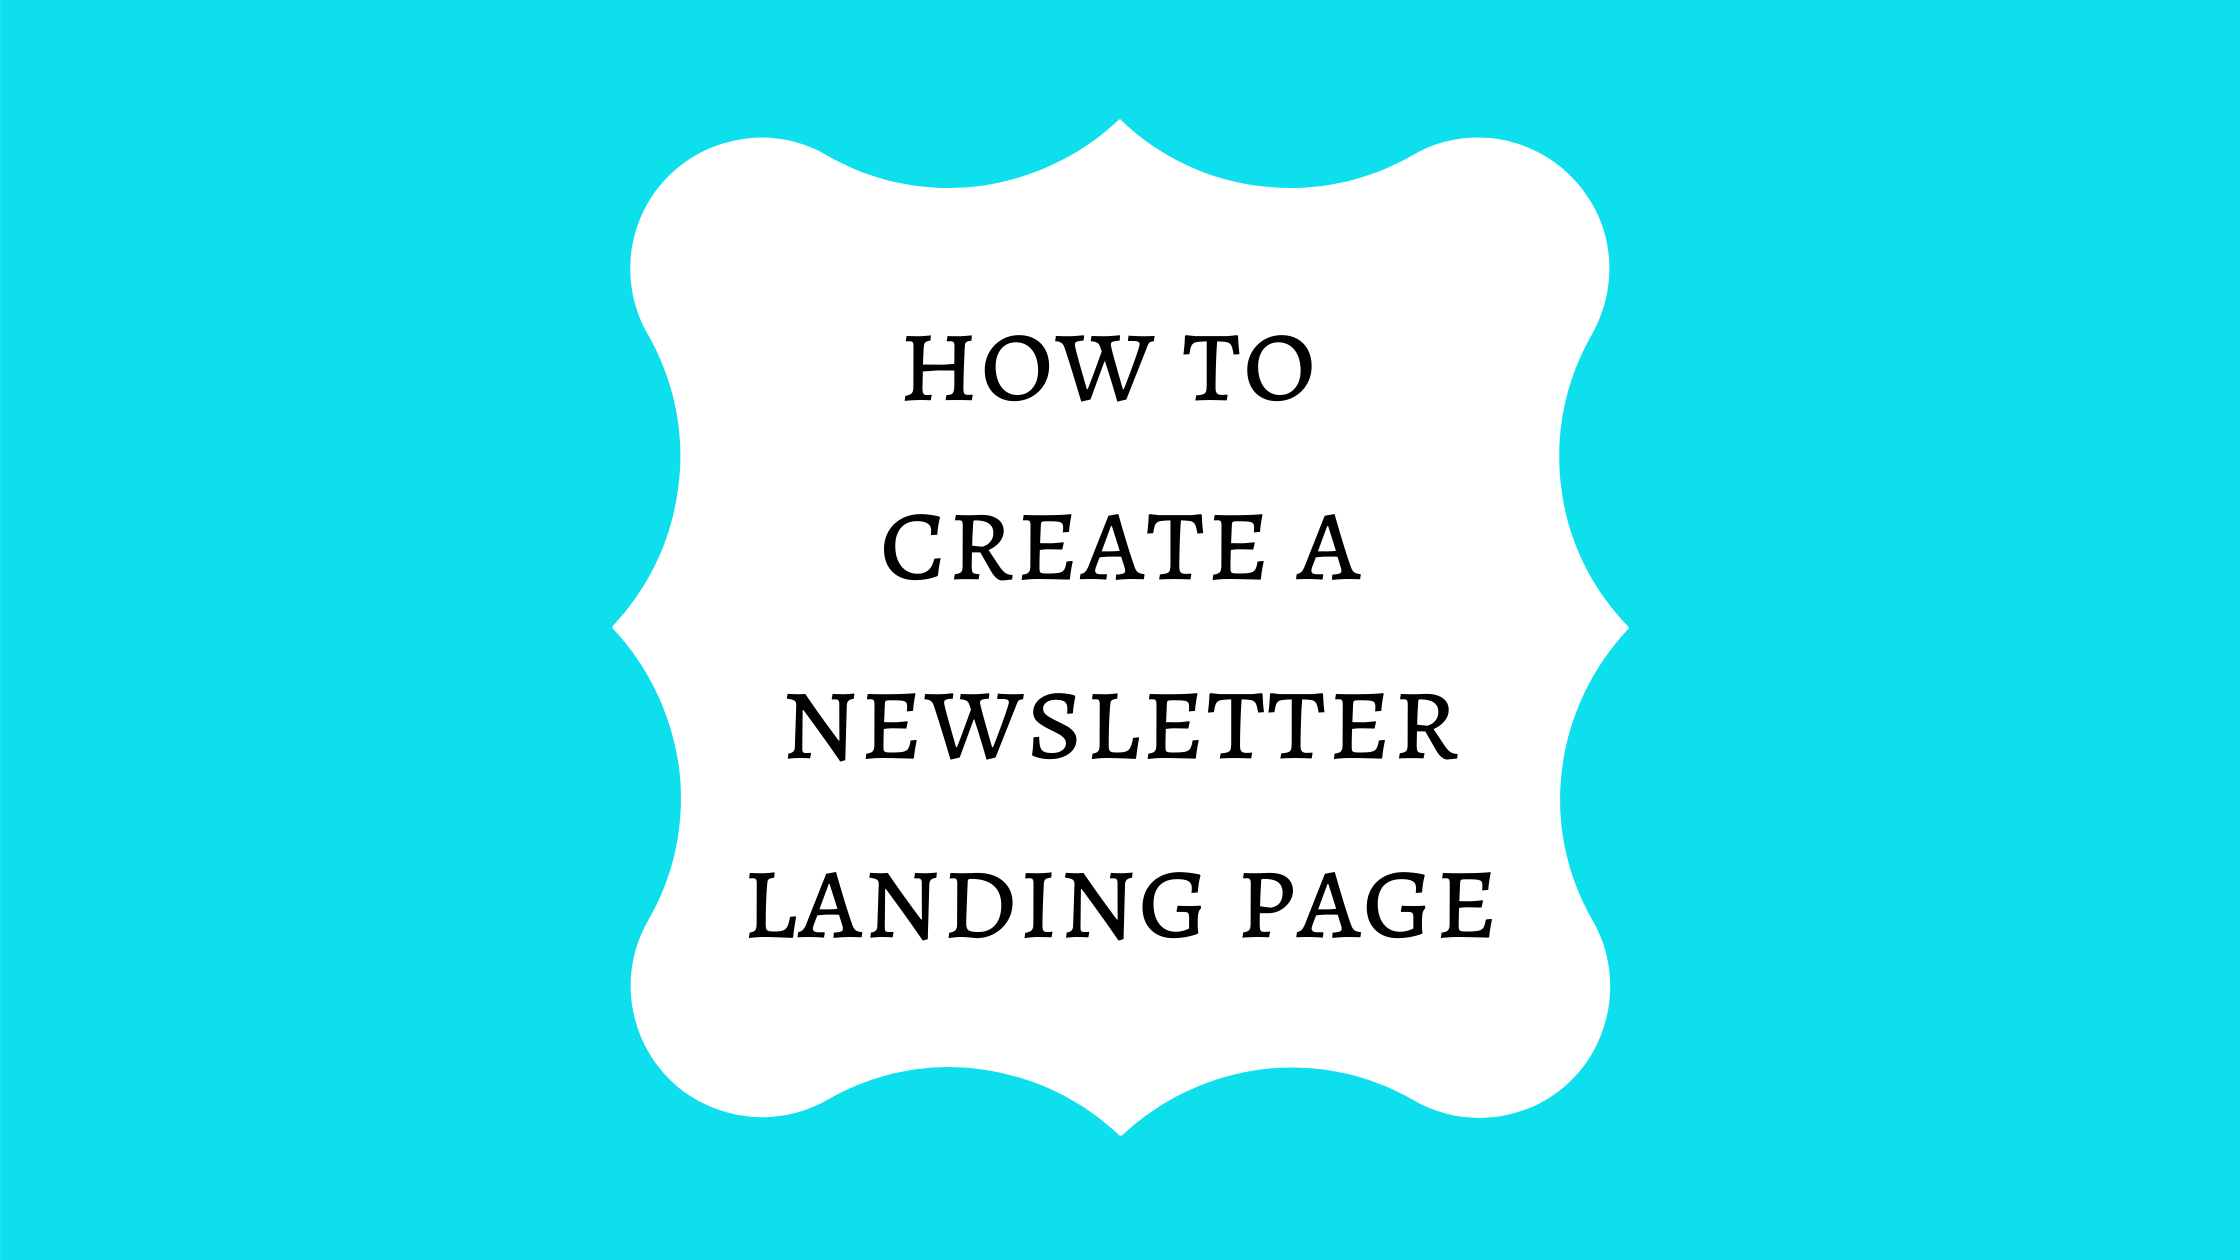 How to Create a Newsletter Landing Page